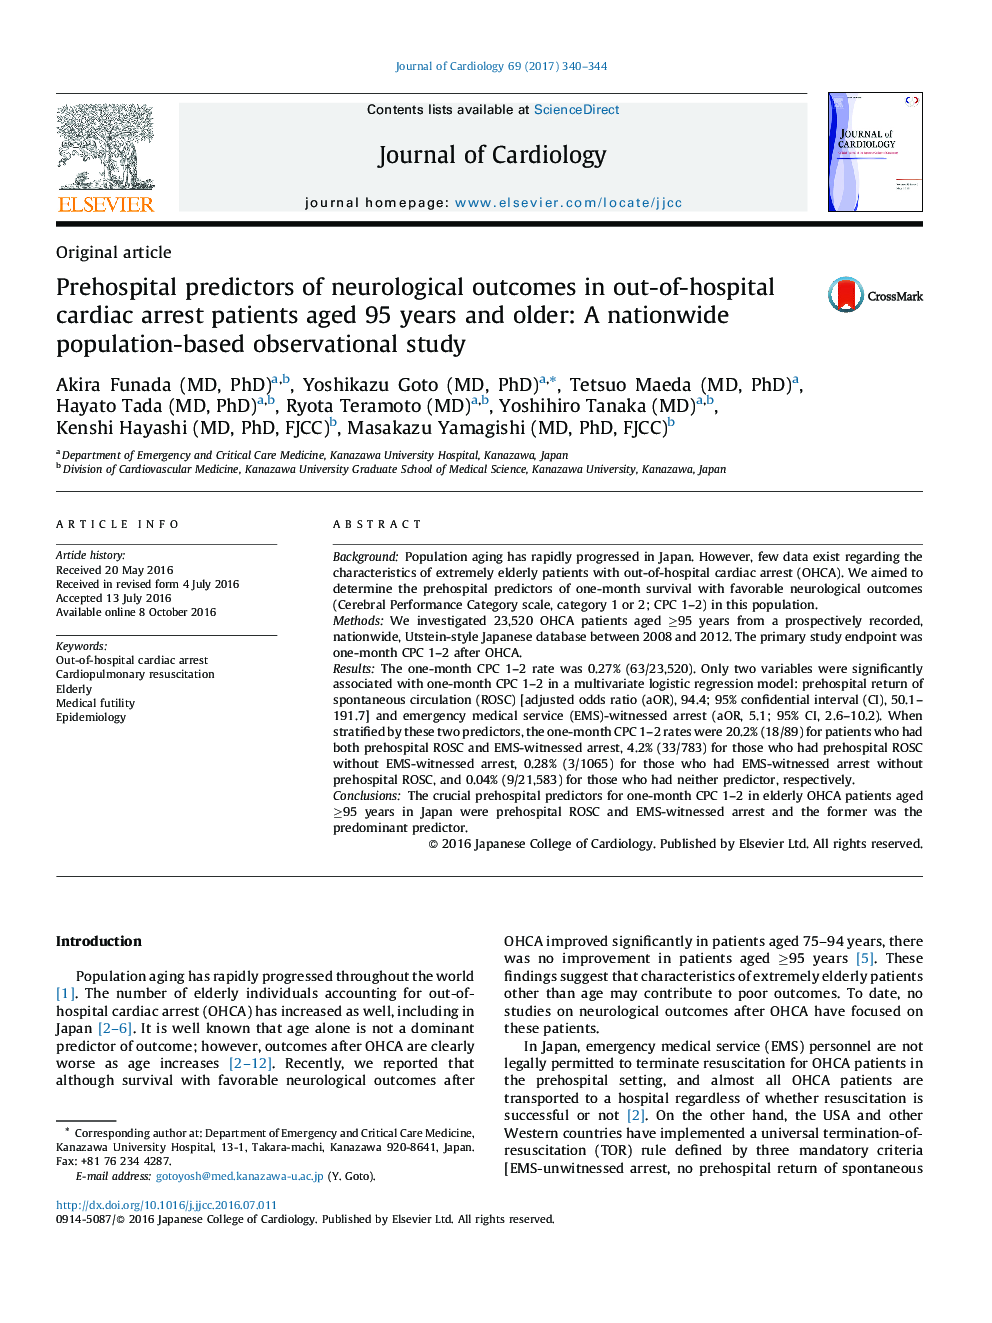 Prehospital predictors of neurological outcomes in out-of-hospital cardiac arrest patients aged 95 years and older: A nationwide population-based observational study